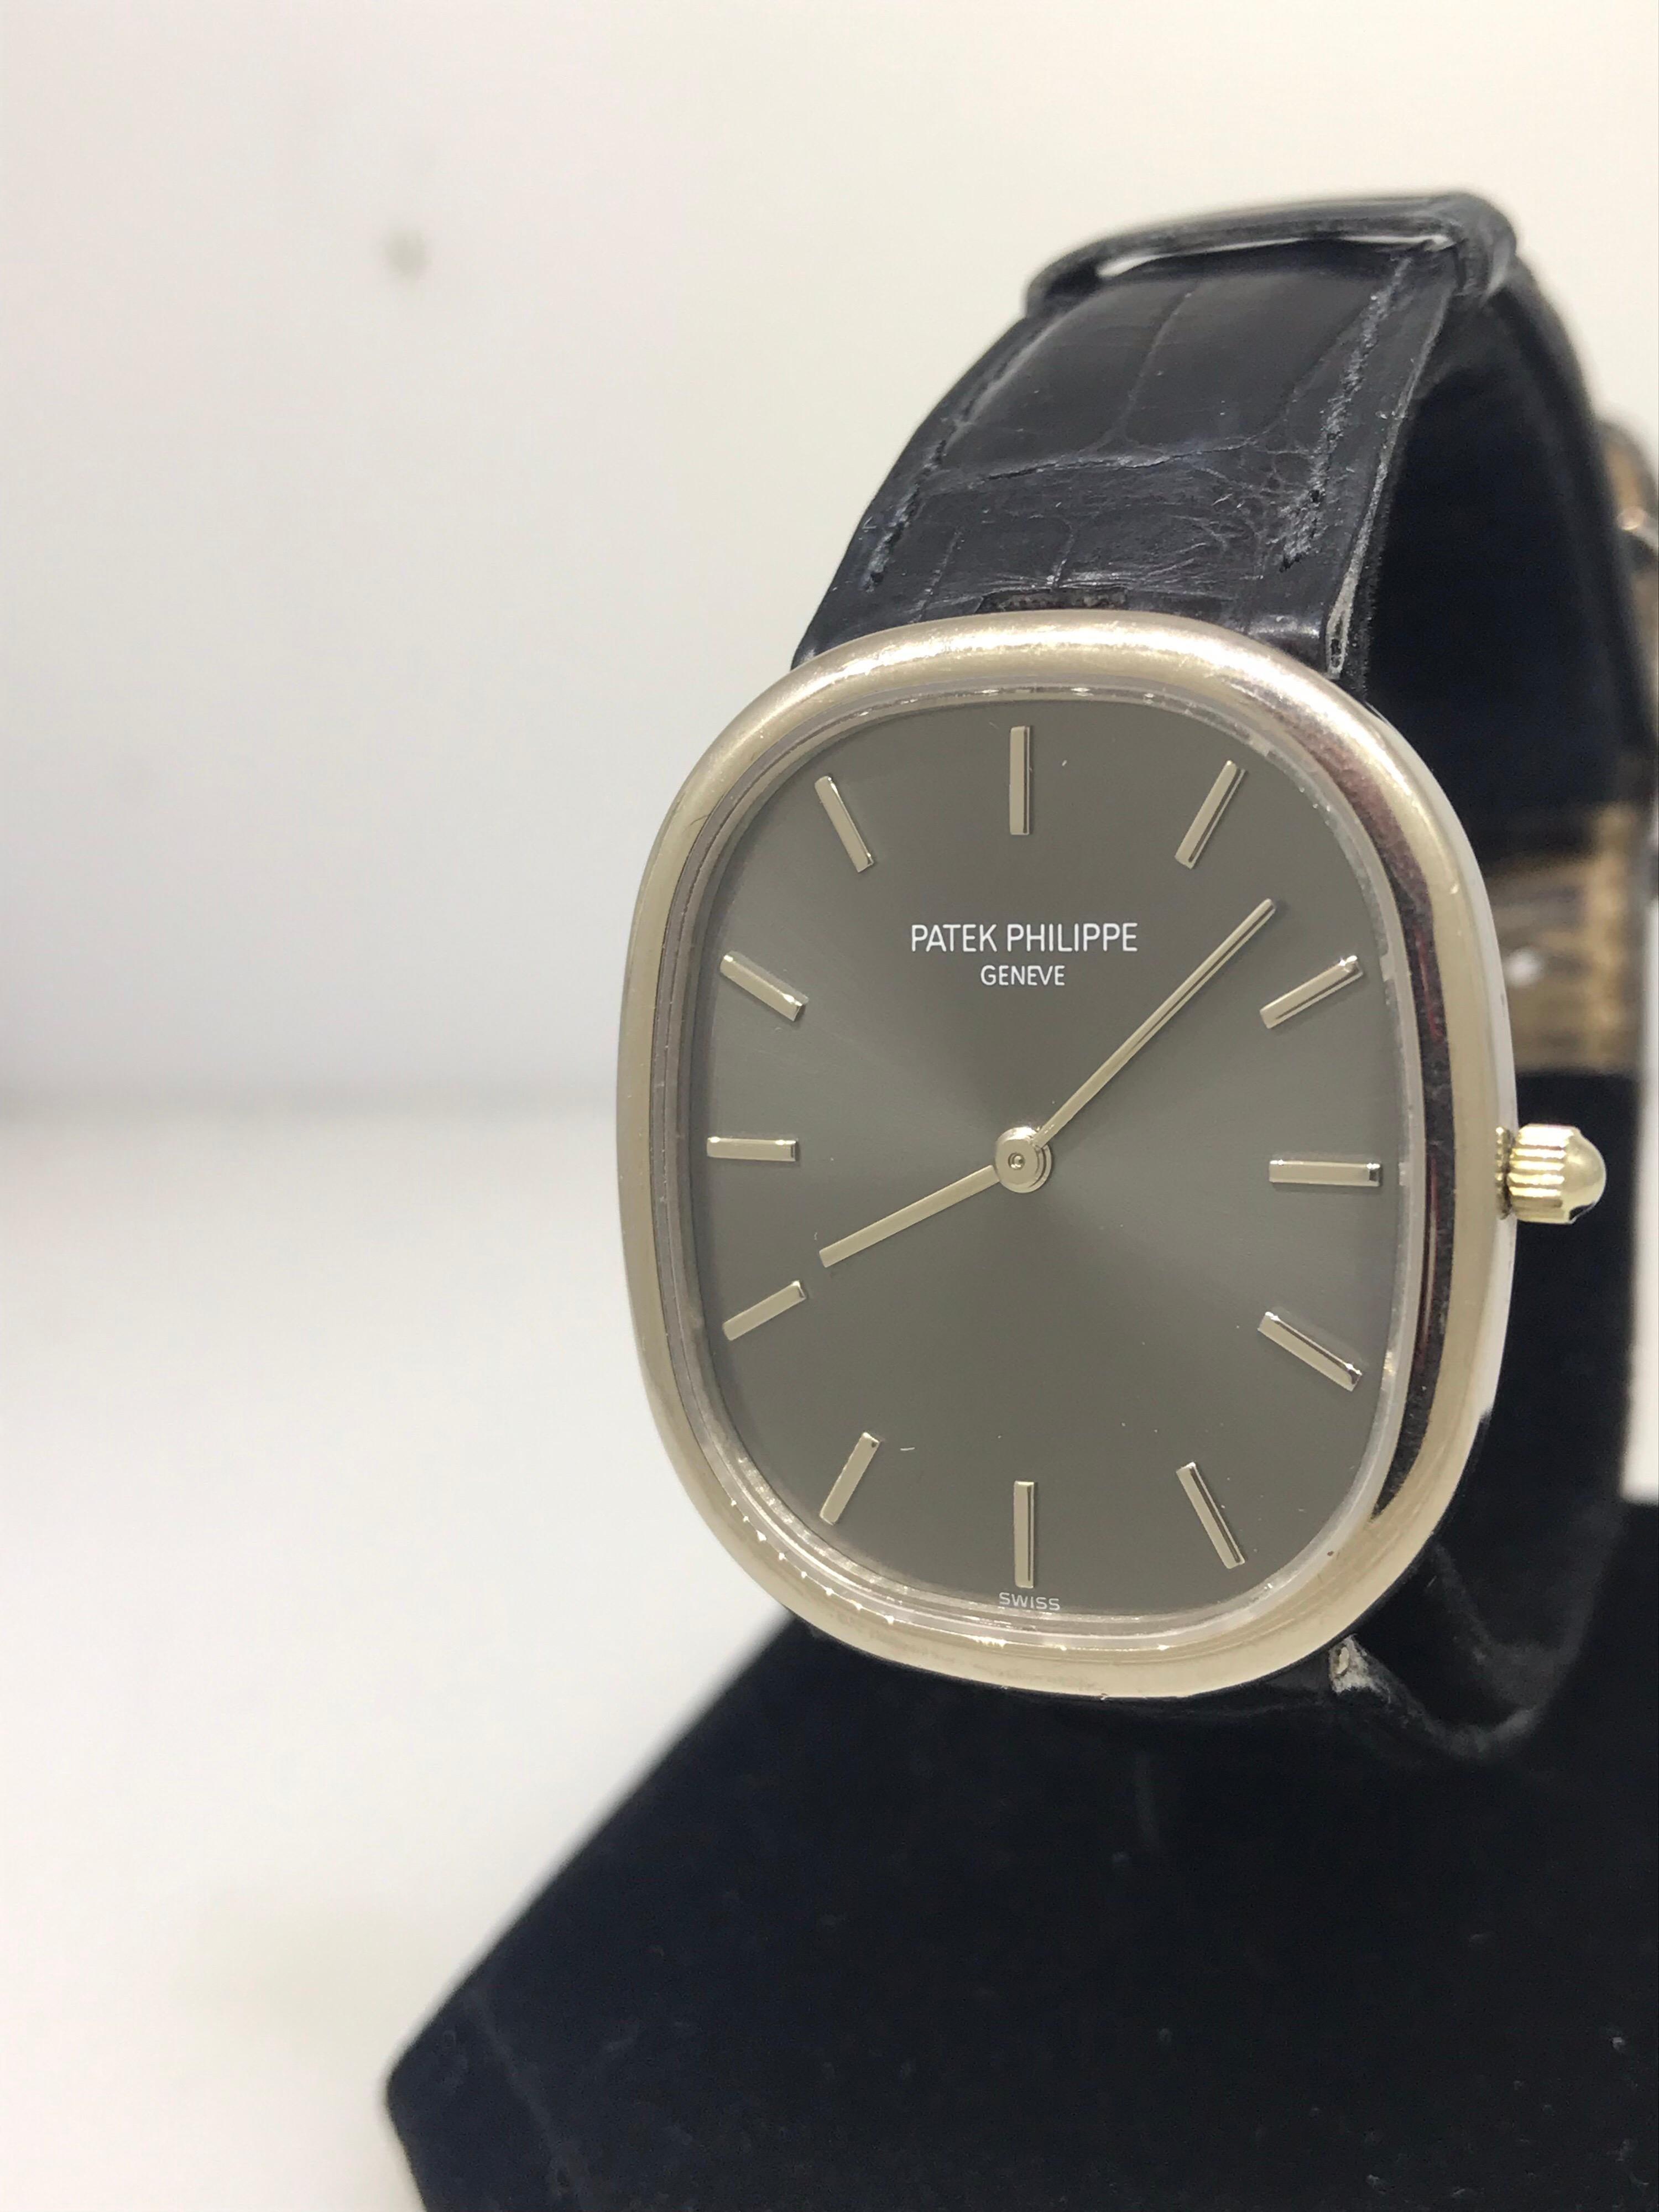 Patek Philippe Ellipse Men's Watch

Model Number: 3738/100G

100% Authentic

Pre-owned 

Case is in excellent condition. Strap is worn out

Comes with original Patek Philippe Warranty 

White Gold Case & Buckle

Gray Dial

Case Dimensions: 31.1mm x